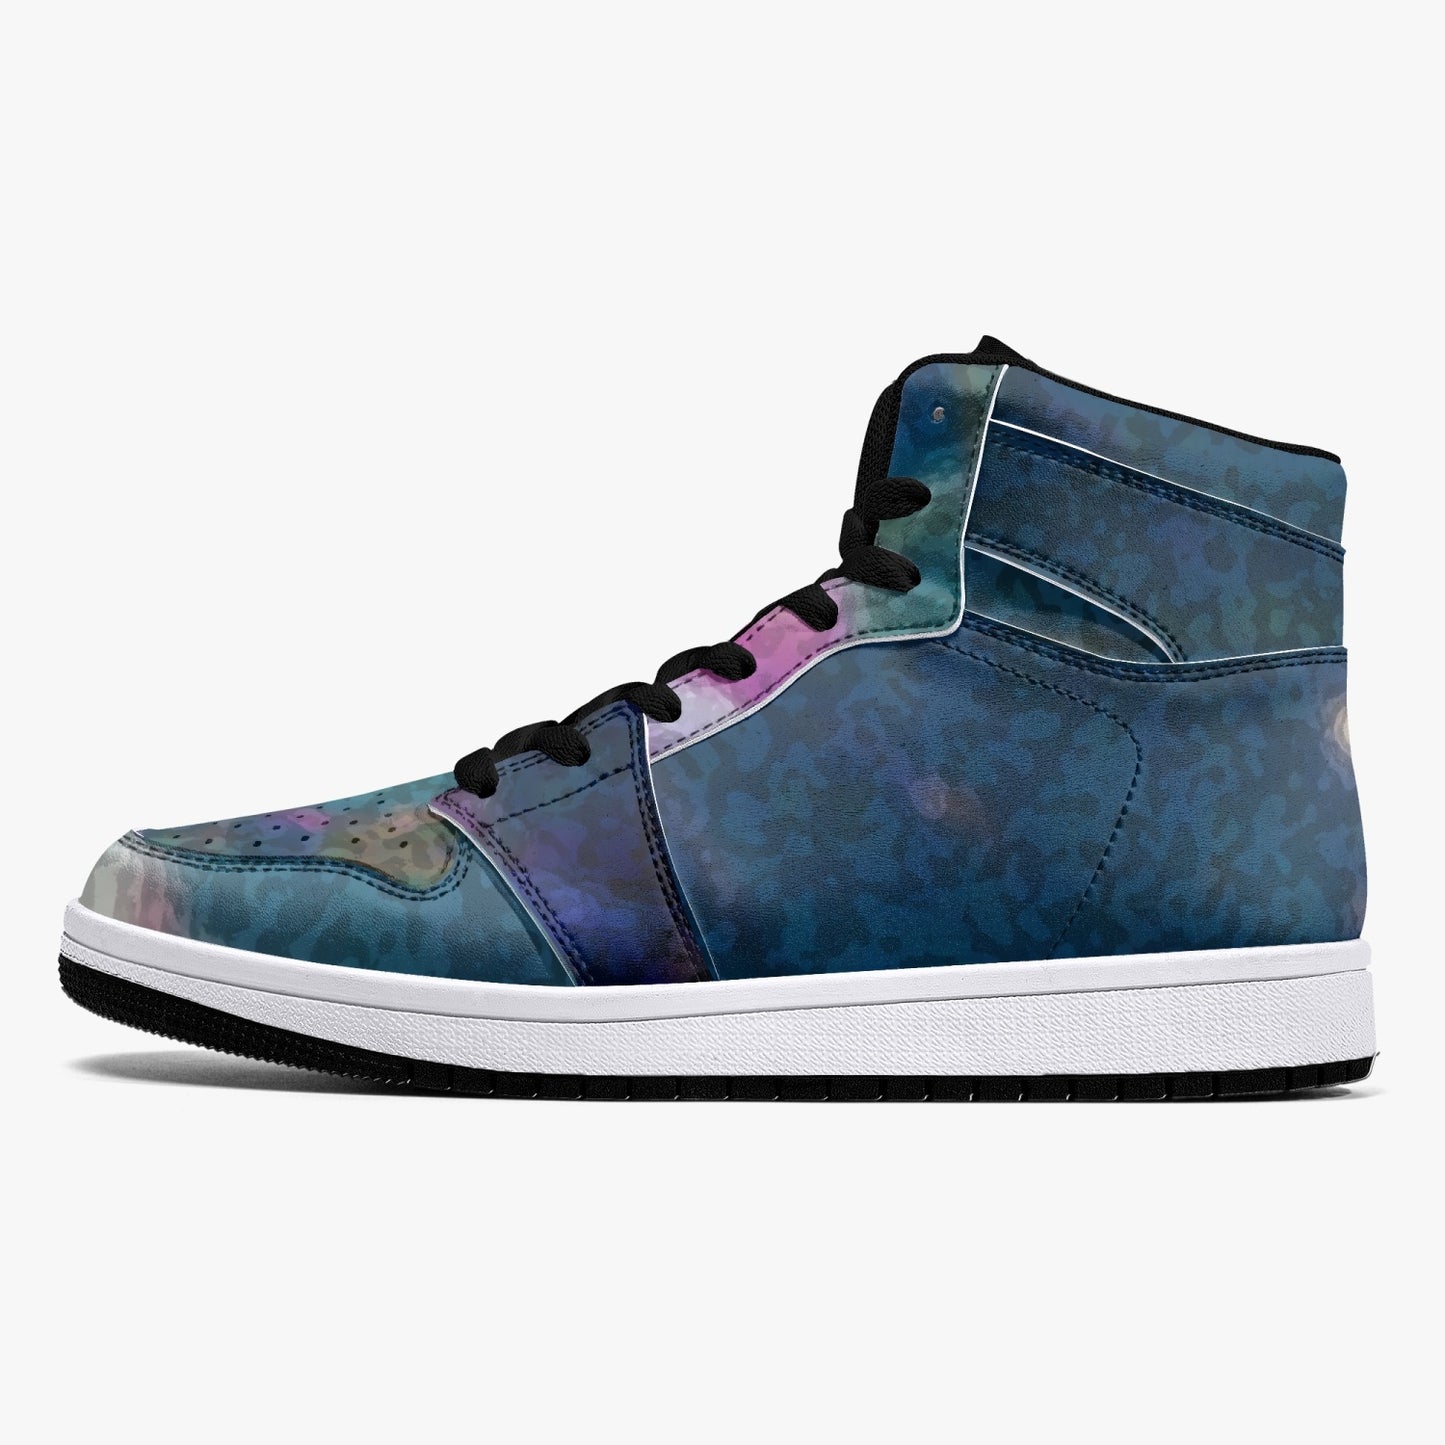 Almost Blue - Macr.in (High-Top Leather Sneakers)